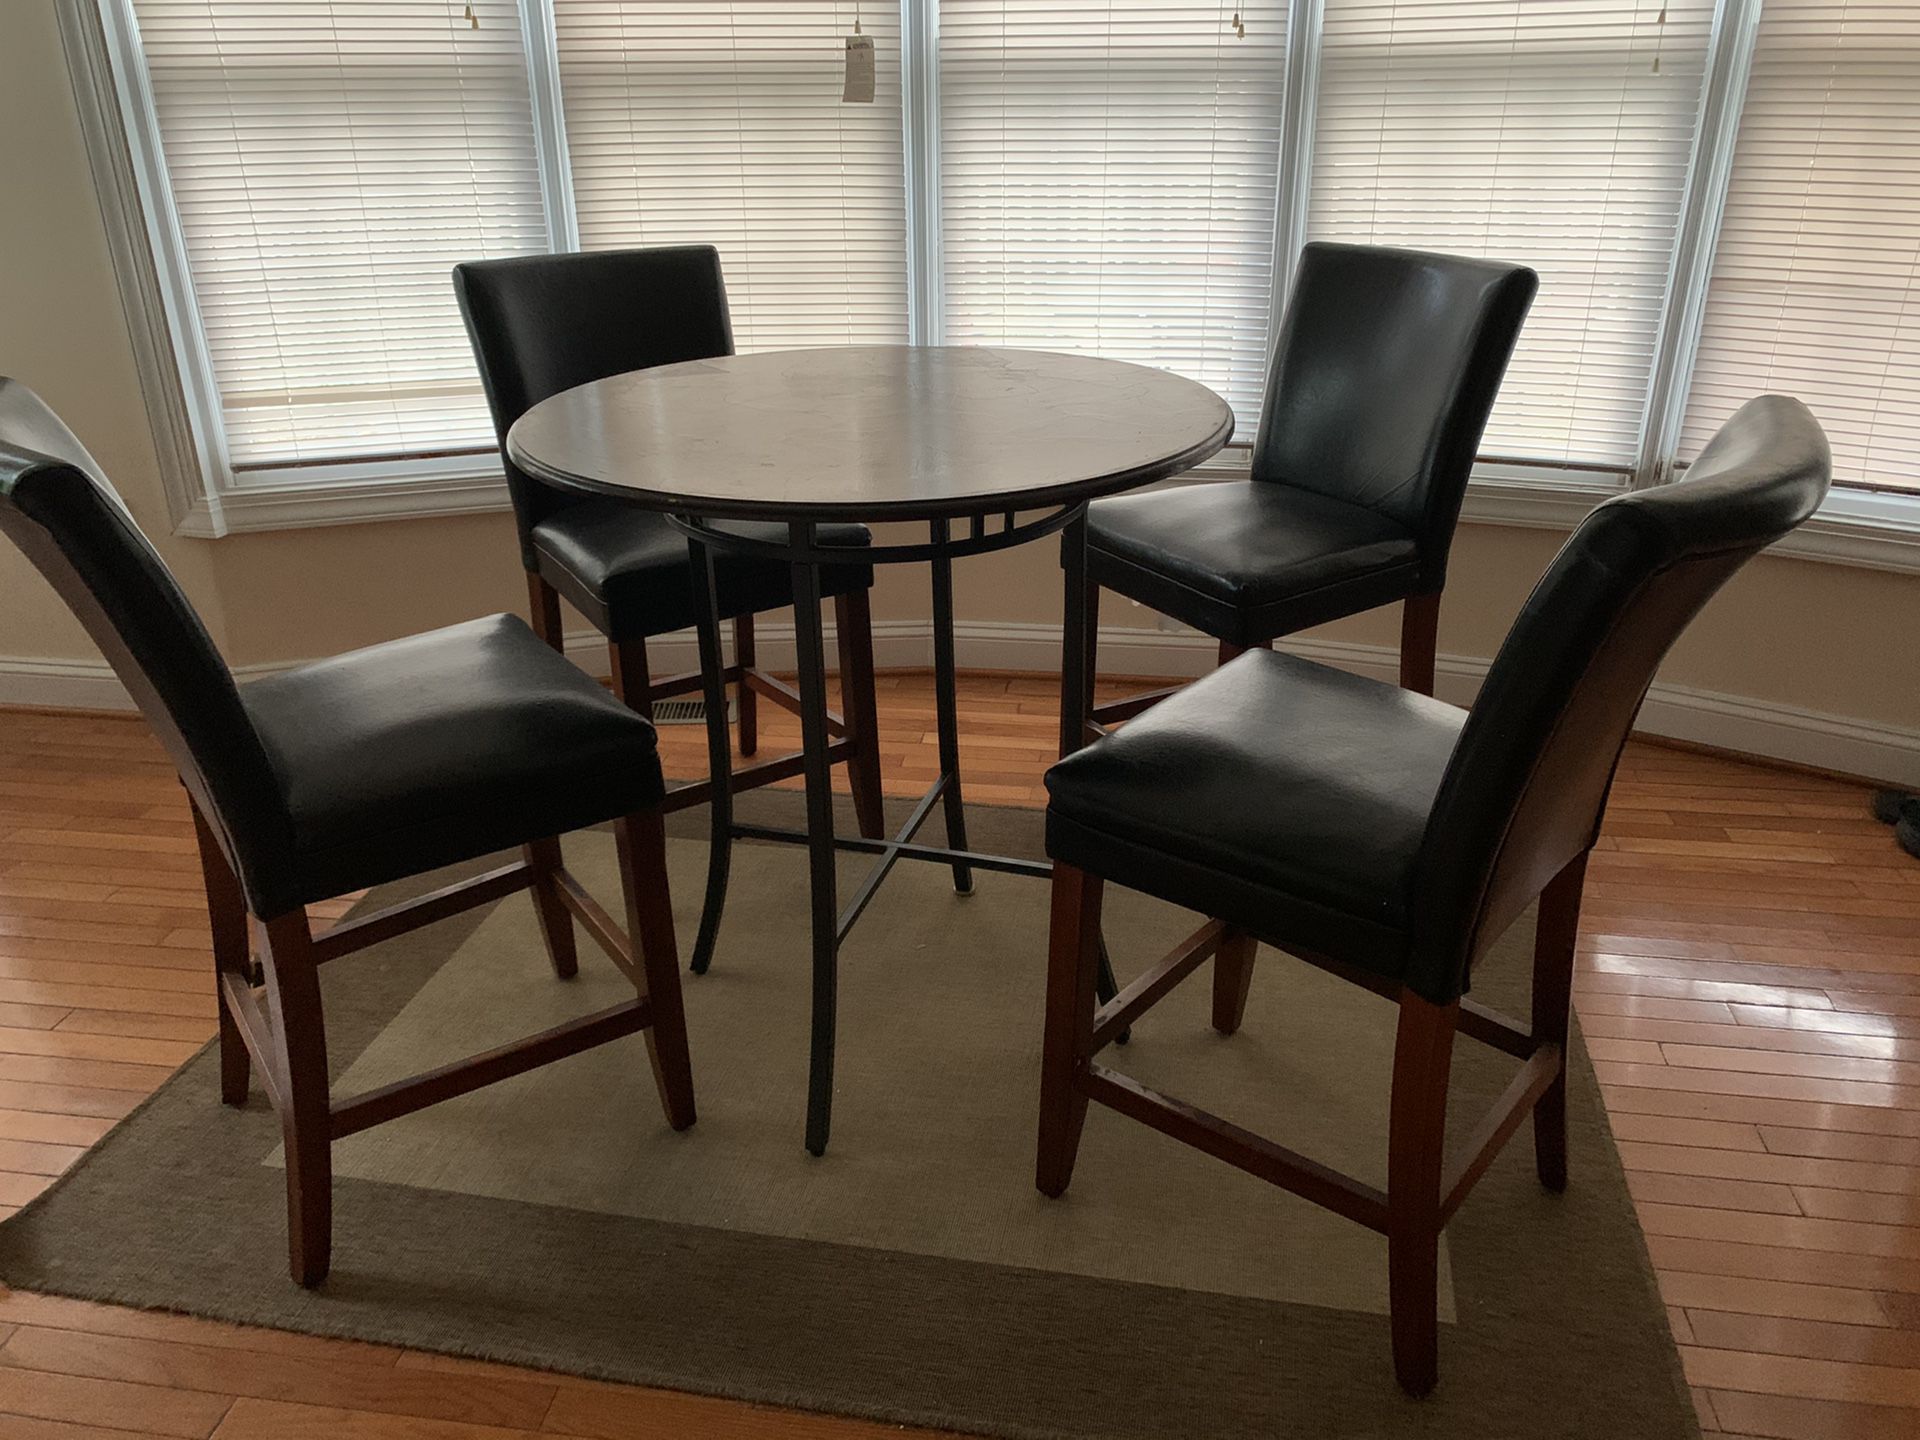 Bistro table with 4 bar chairs